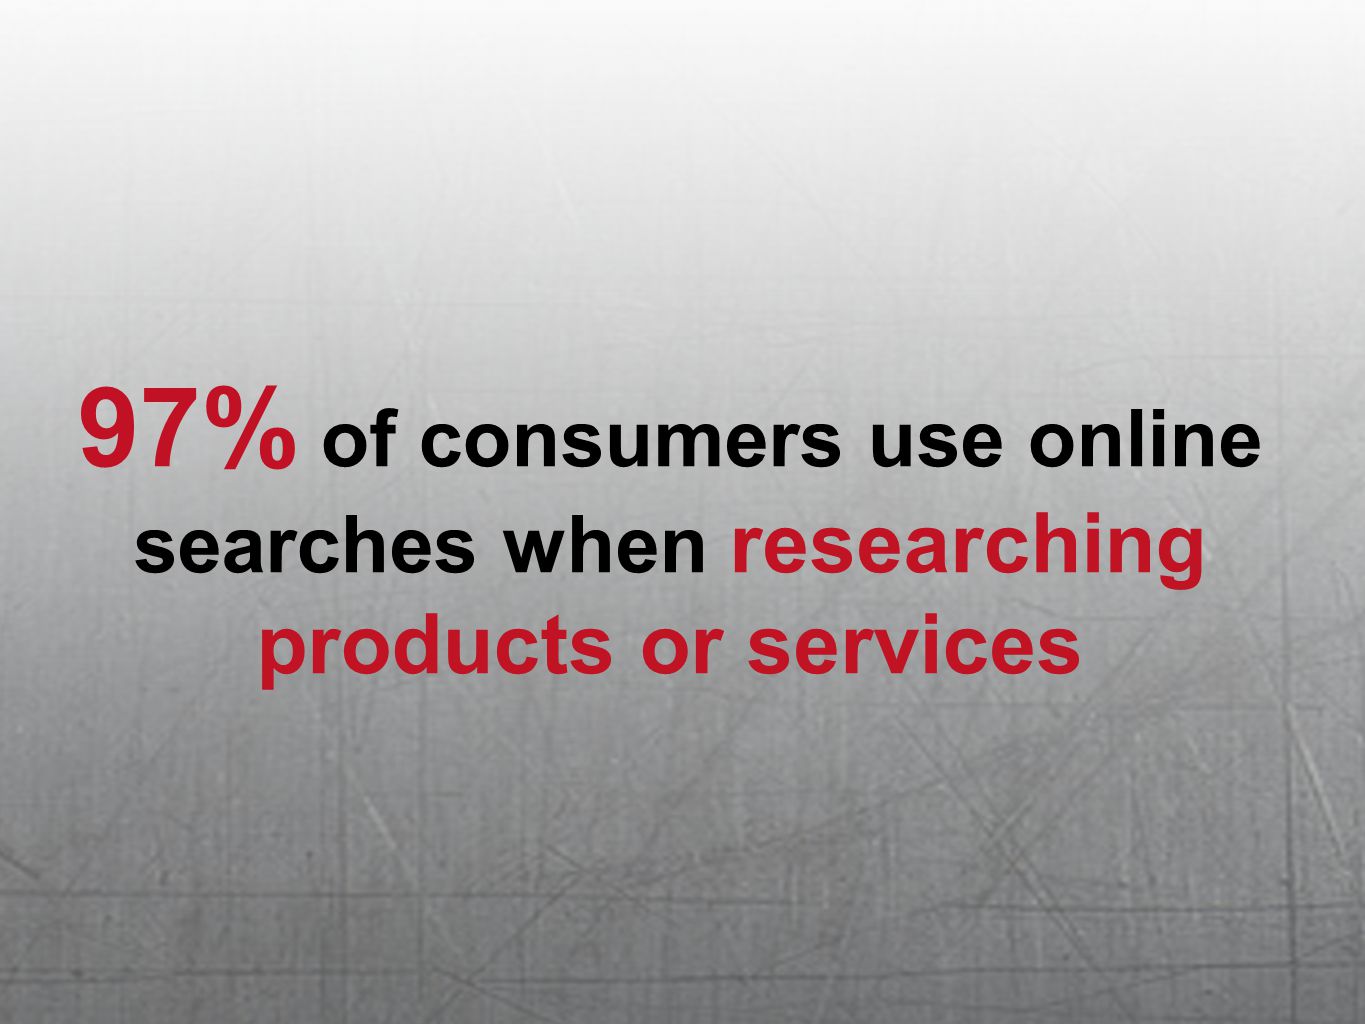 97% of consumers use online searches when researching products or services